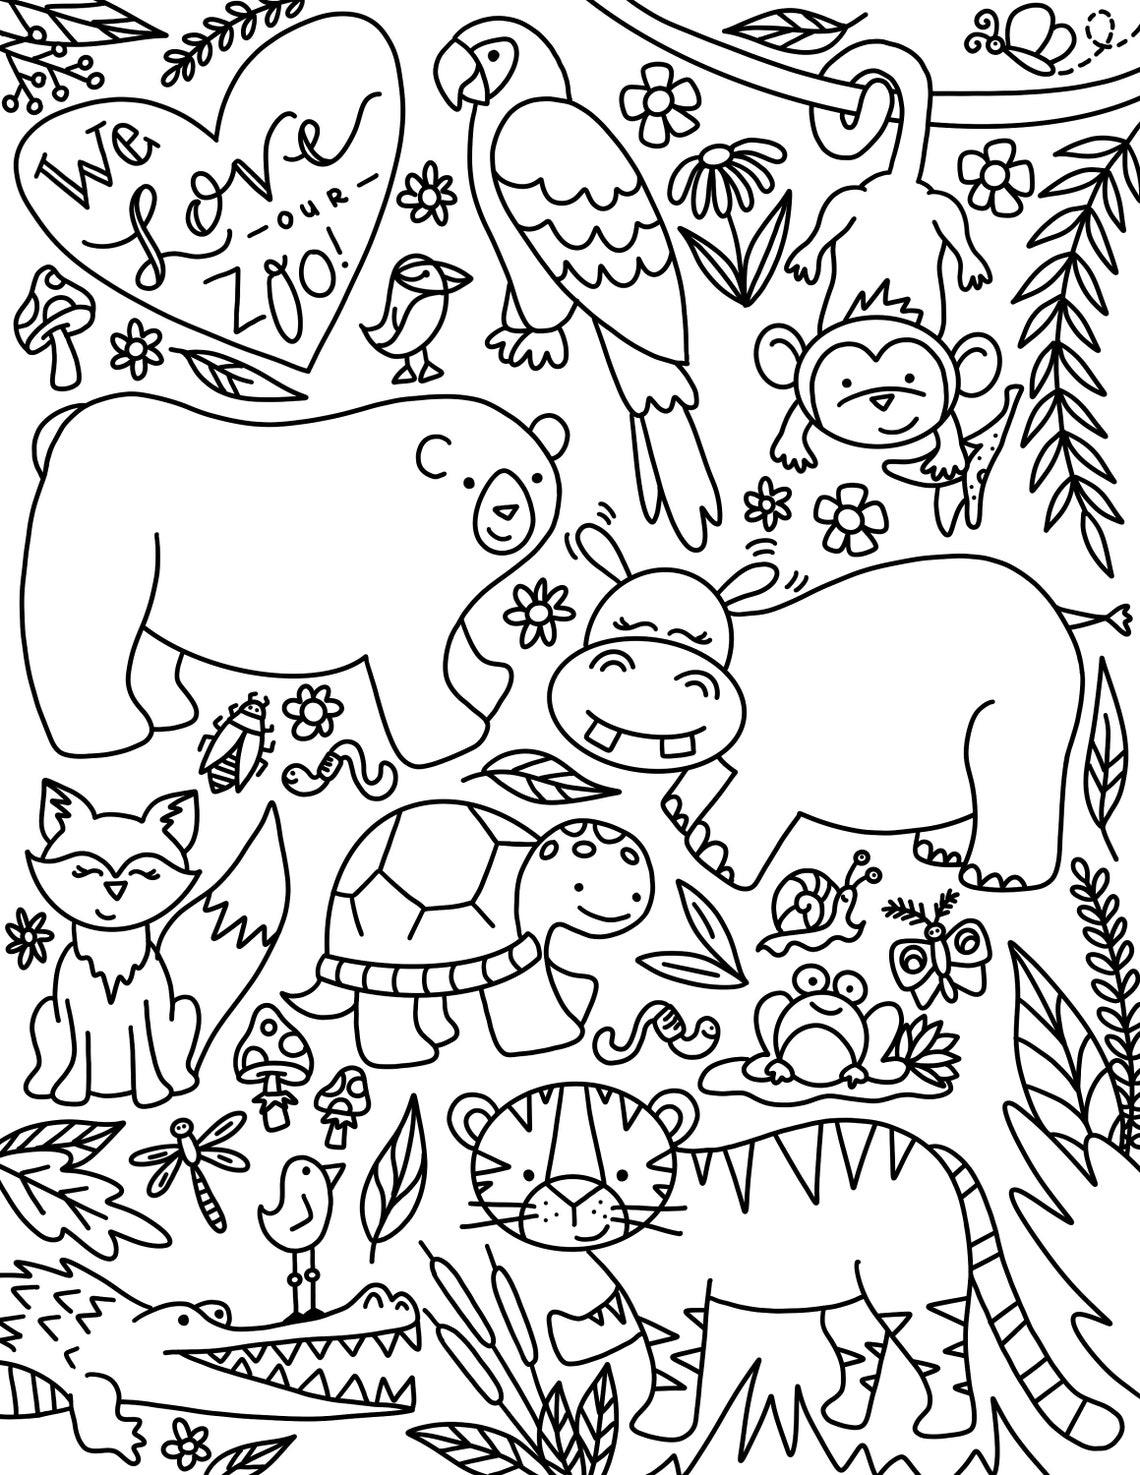 Zoo Coloring Pages Instant Download hand-drawn Featuring Lions, Tigers ...